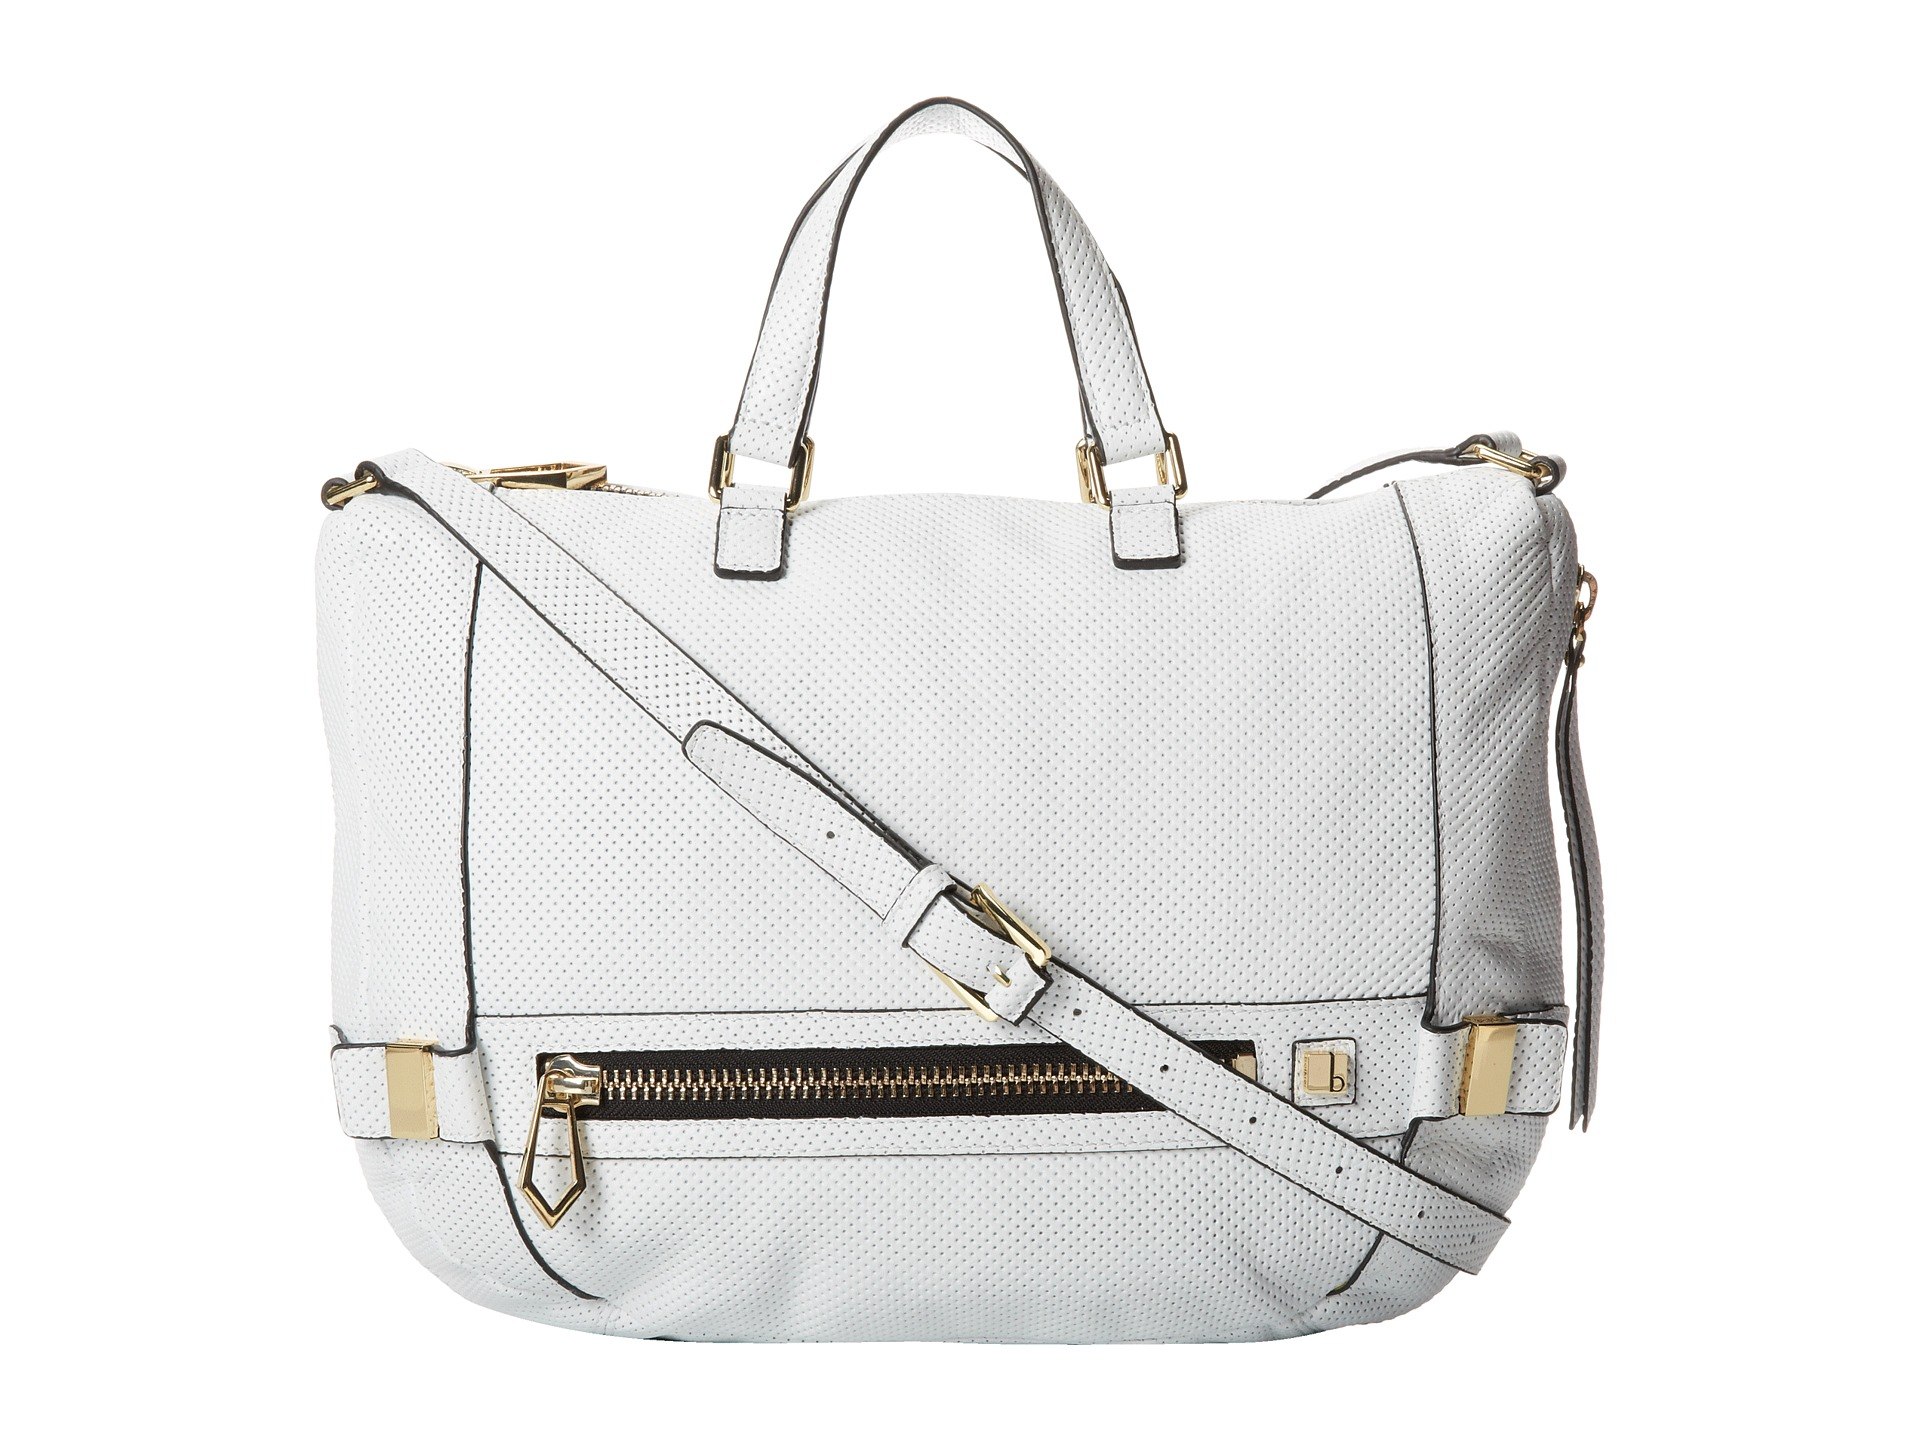 Botkier Honore Leather Crossbody Bag in White | Lyst